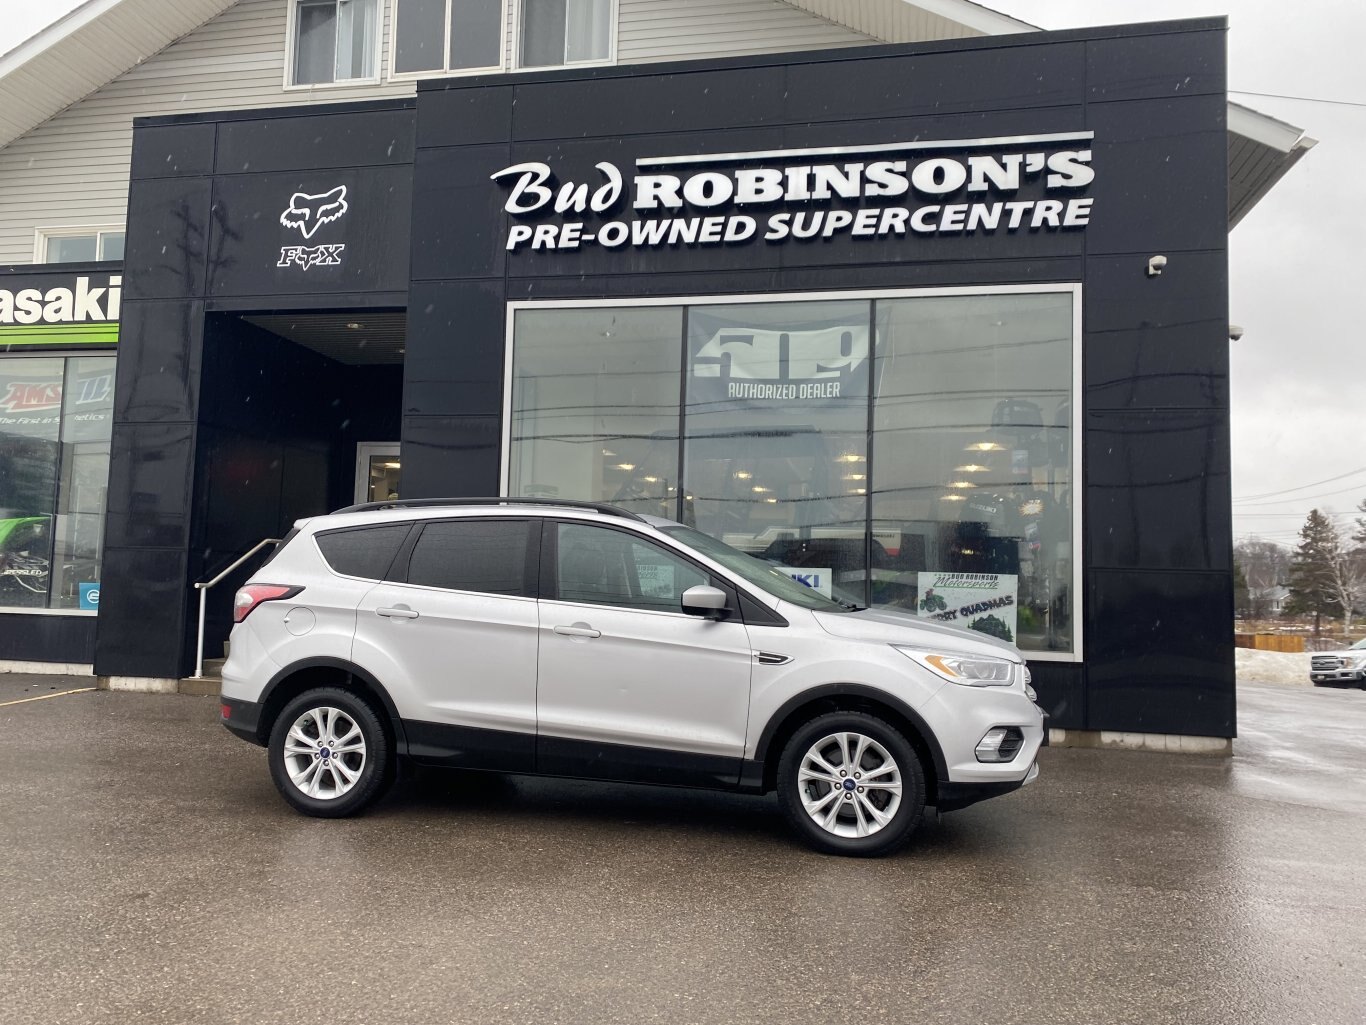 2018 FORD ESCAPE SEL AWD LEATHER SEATS, SUNROOF, HEATED SEATS, REAR VIEW CAMERA AND NAVIGATION!!